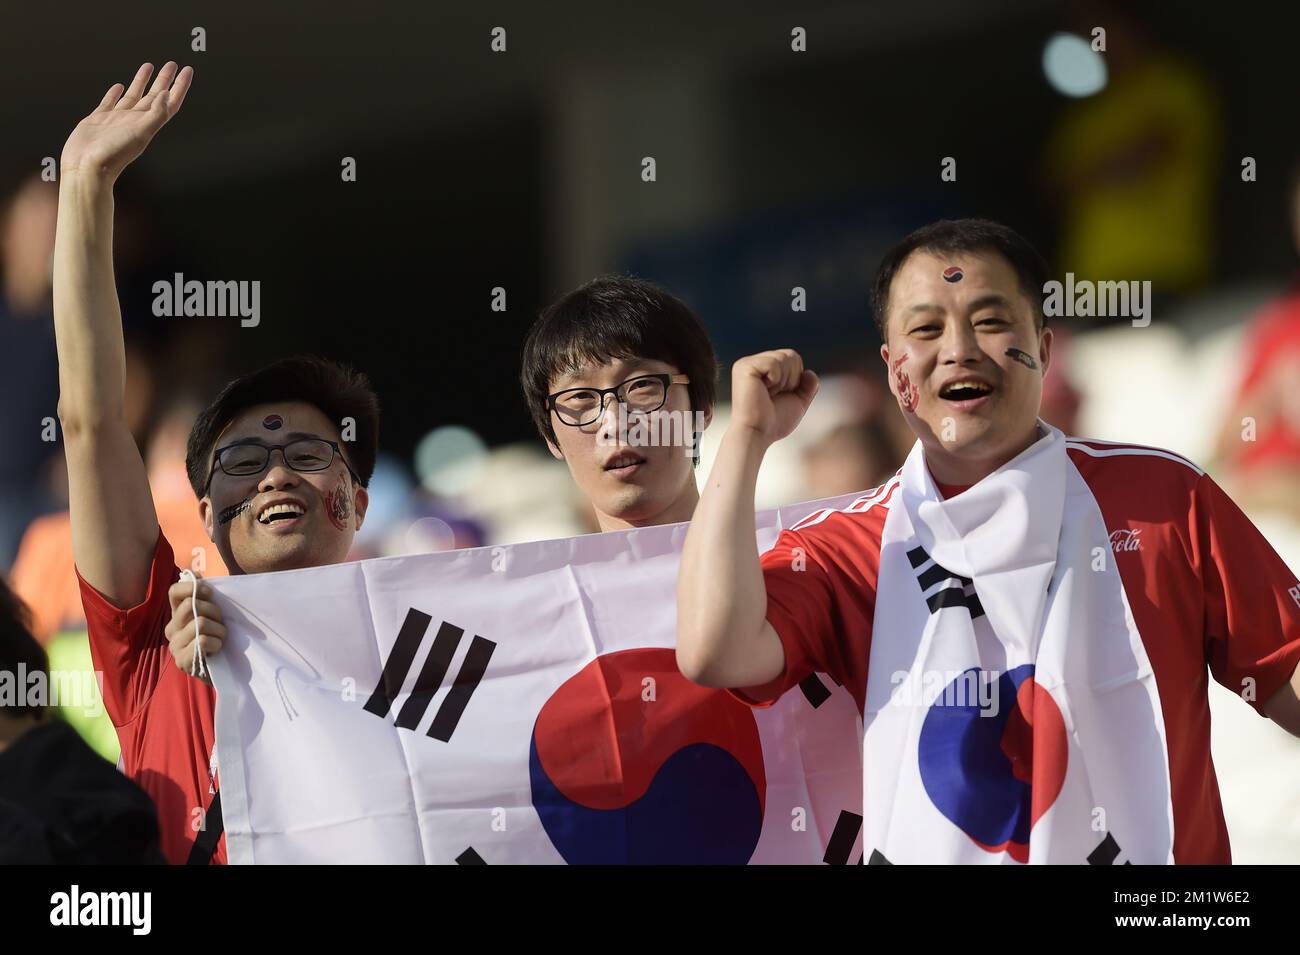 20140626 - SAO PAULO, BRAZIL: Korean fans pictured before the match between Belgian national soccer team Red Devils and South-Korea, third match in group H, in the stadium 'Arena de Sao Paulo', in Itaquera, Sao Paulo, Brazil, during the 2014 FIFA World Cup, Thursday 26 June 2014. The Red Devils lead their group H with two victories. BELGA PHOTO YORICK JANSENS Stock Photo